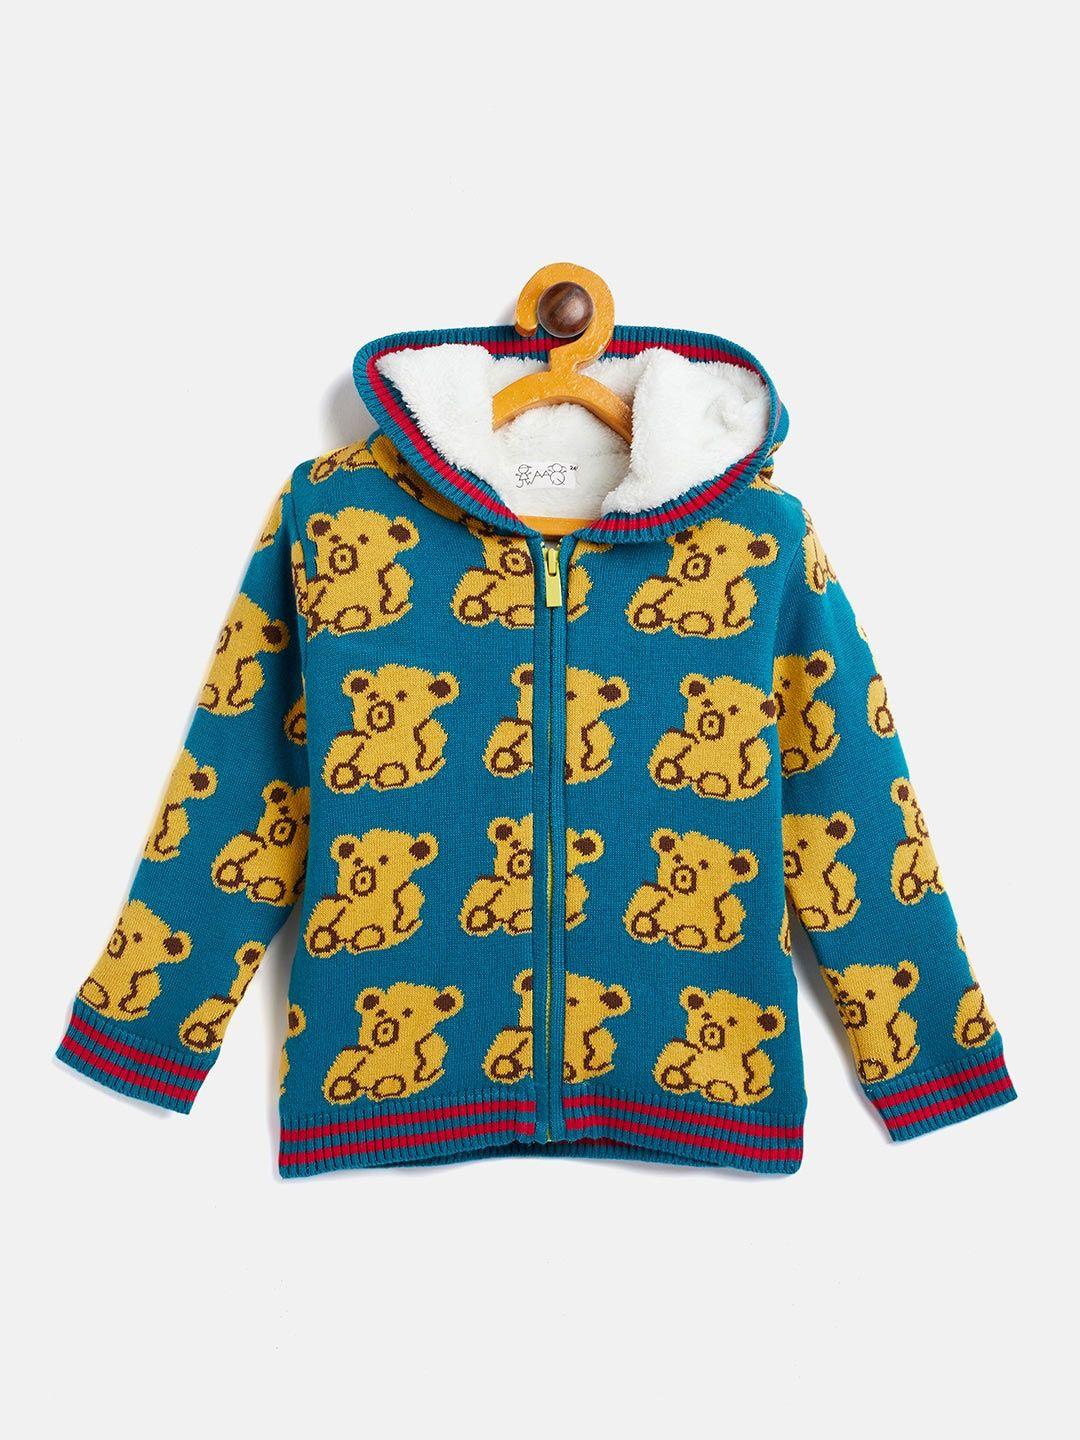 wildlinggs infants printed hooded pure cotton cardigan sweater